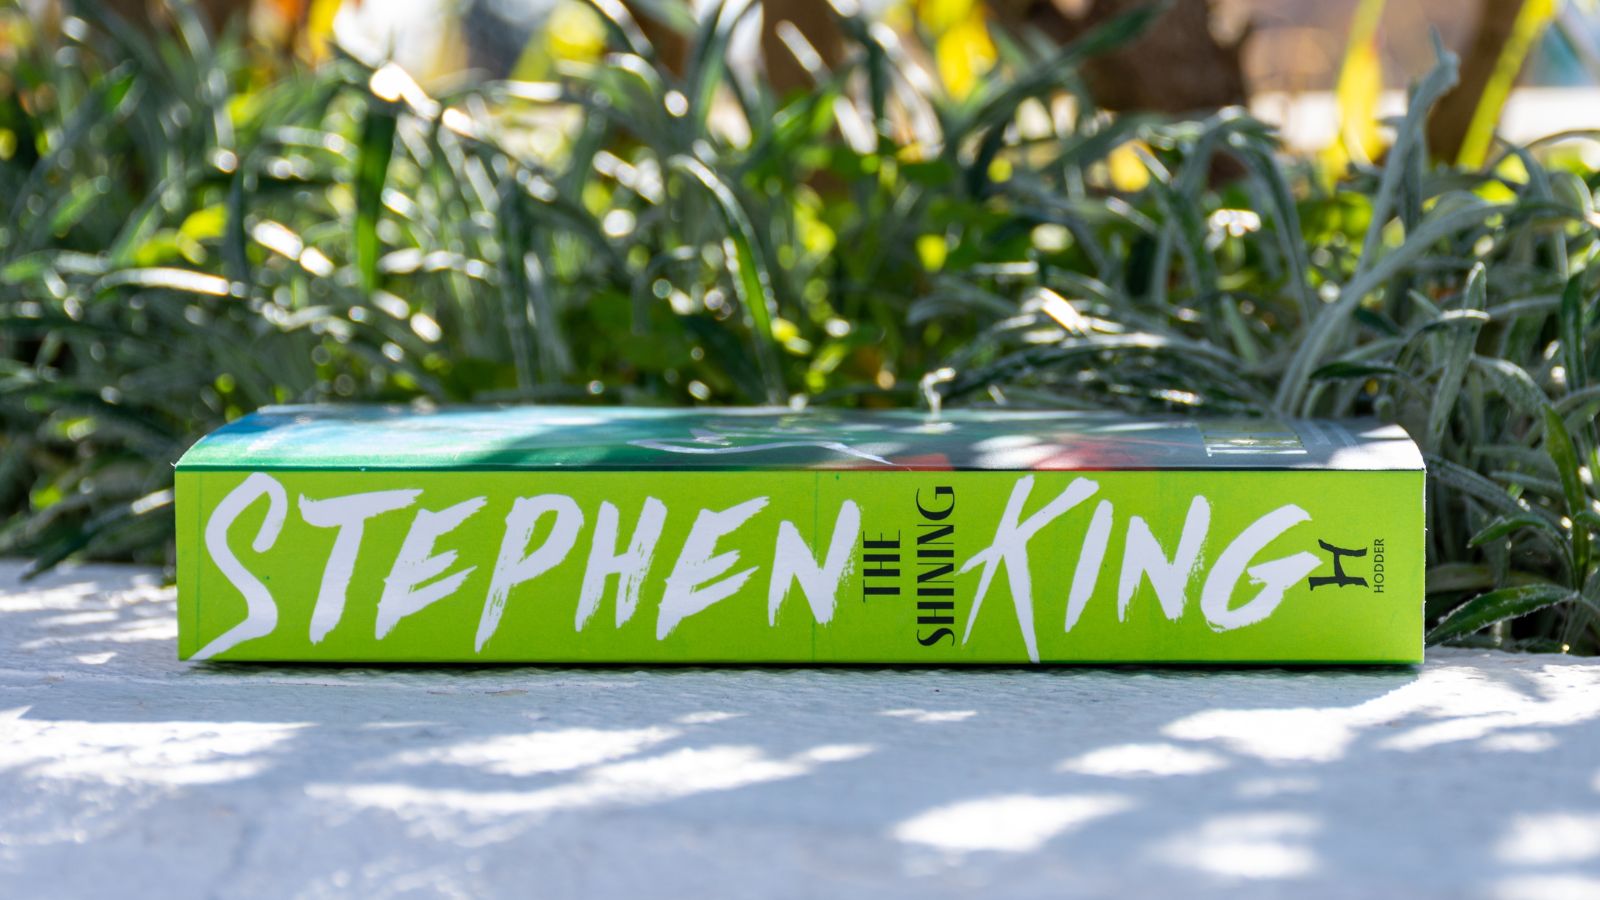 <p>Stephen King is one of horror's greatest authors, for good reason. Of all his novels, The Shining stands out because of its delve into psychological horror, which has been hugely influential within the genre. It also inspired one of the most famous horror movies ever, but the original material is absolutely worth reading.</p>